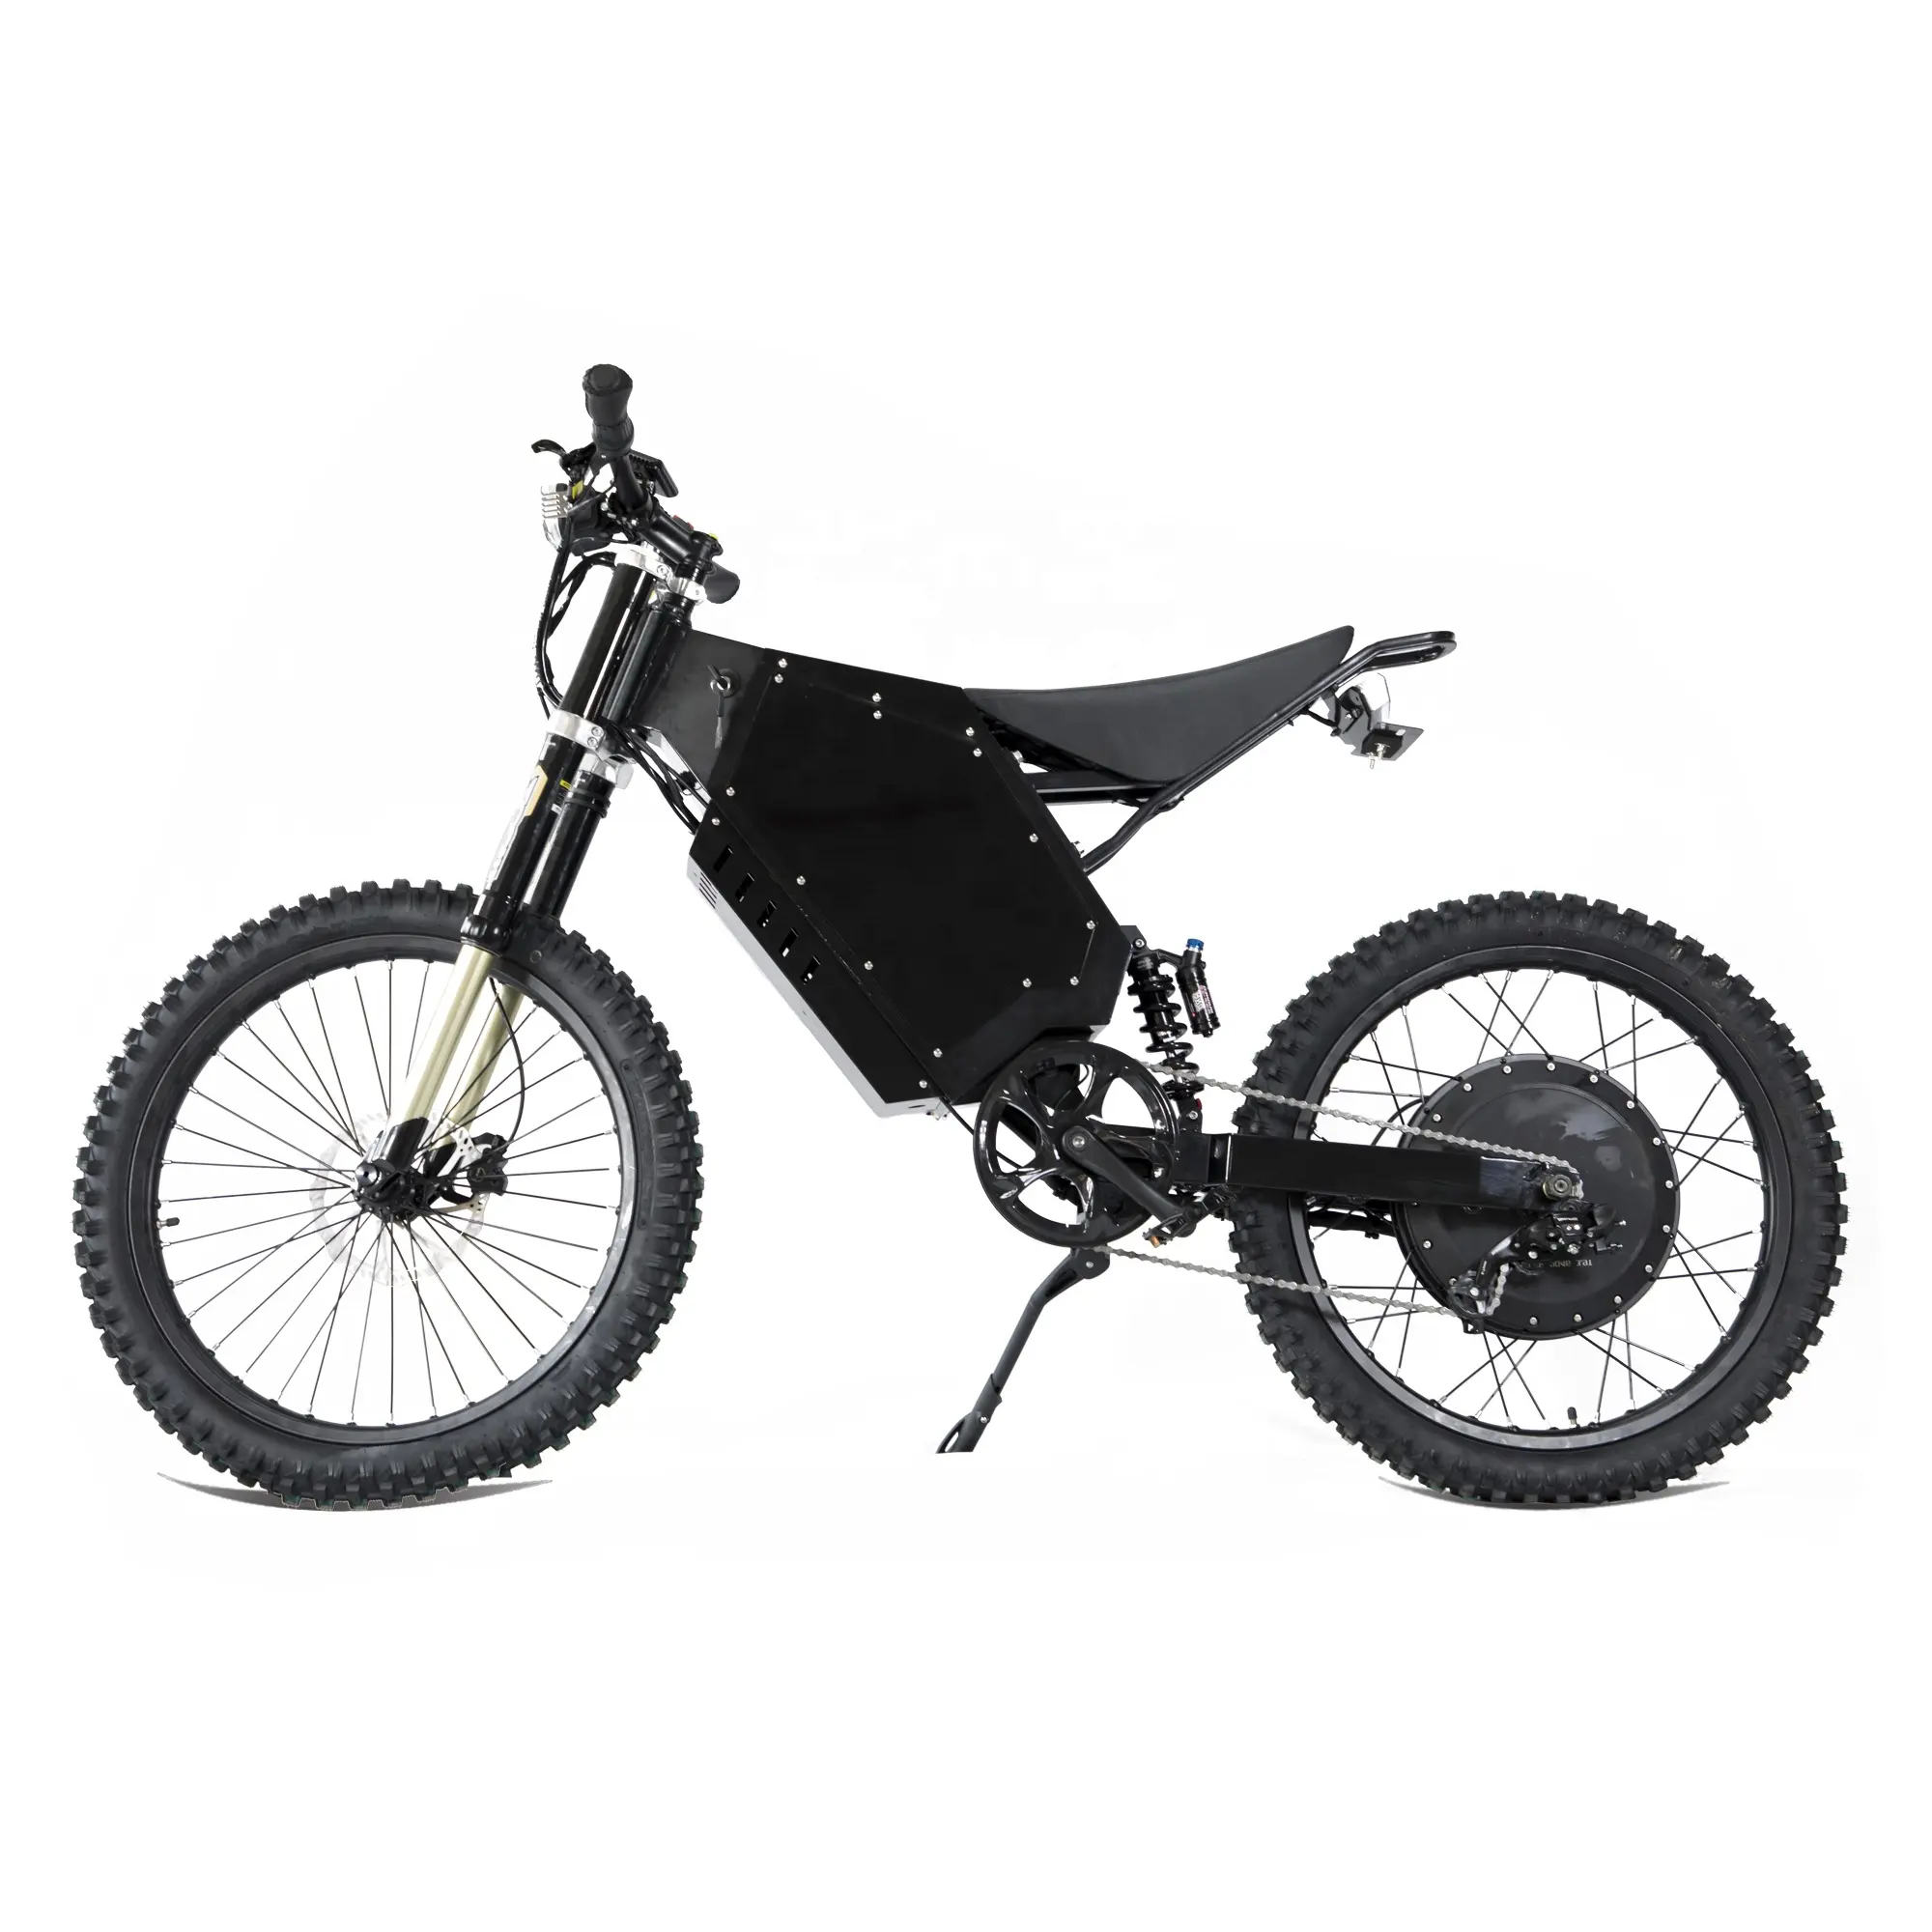 Hot sale 3000w 5000w 8000w bomber adult electric dirt bike motorcycle